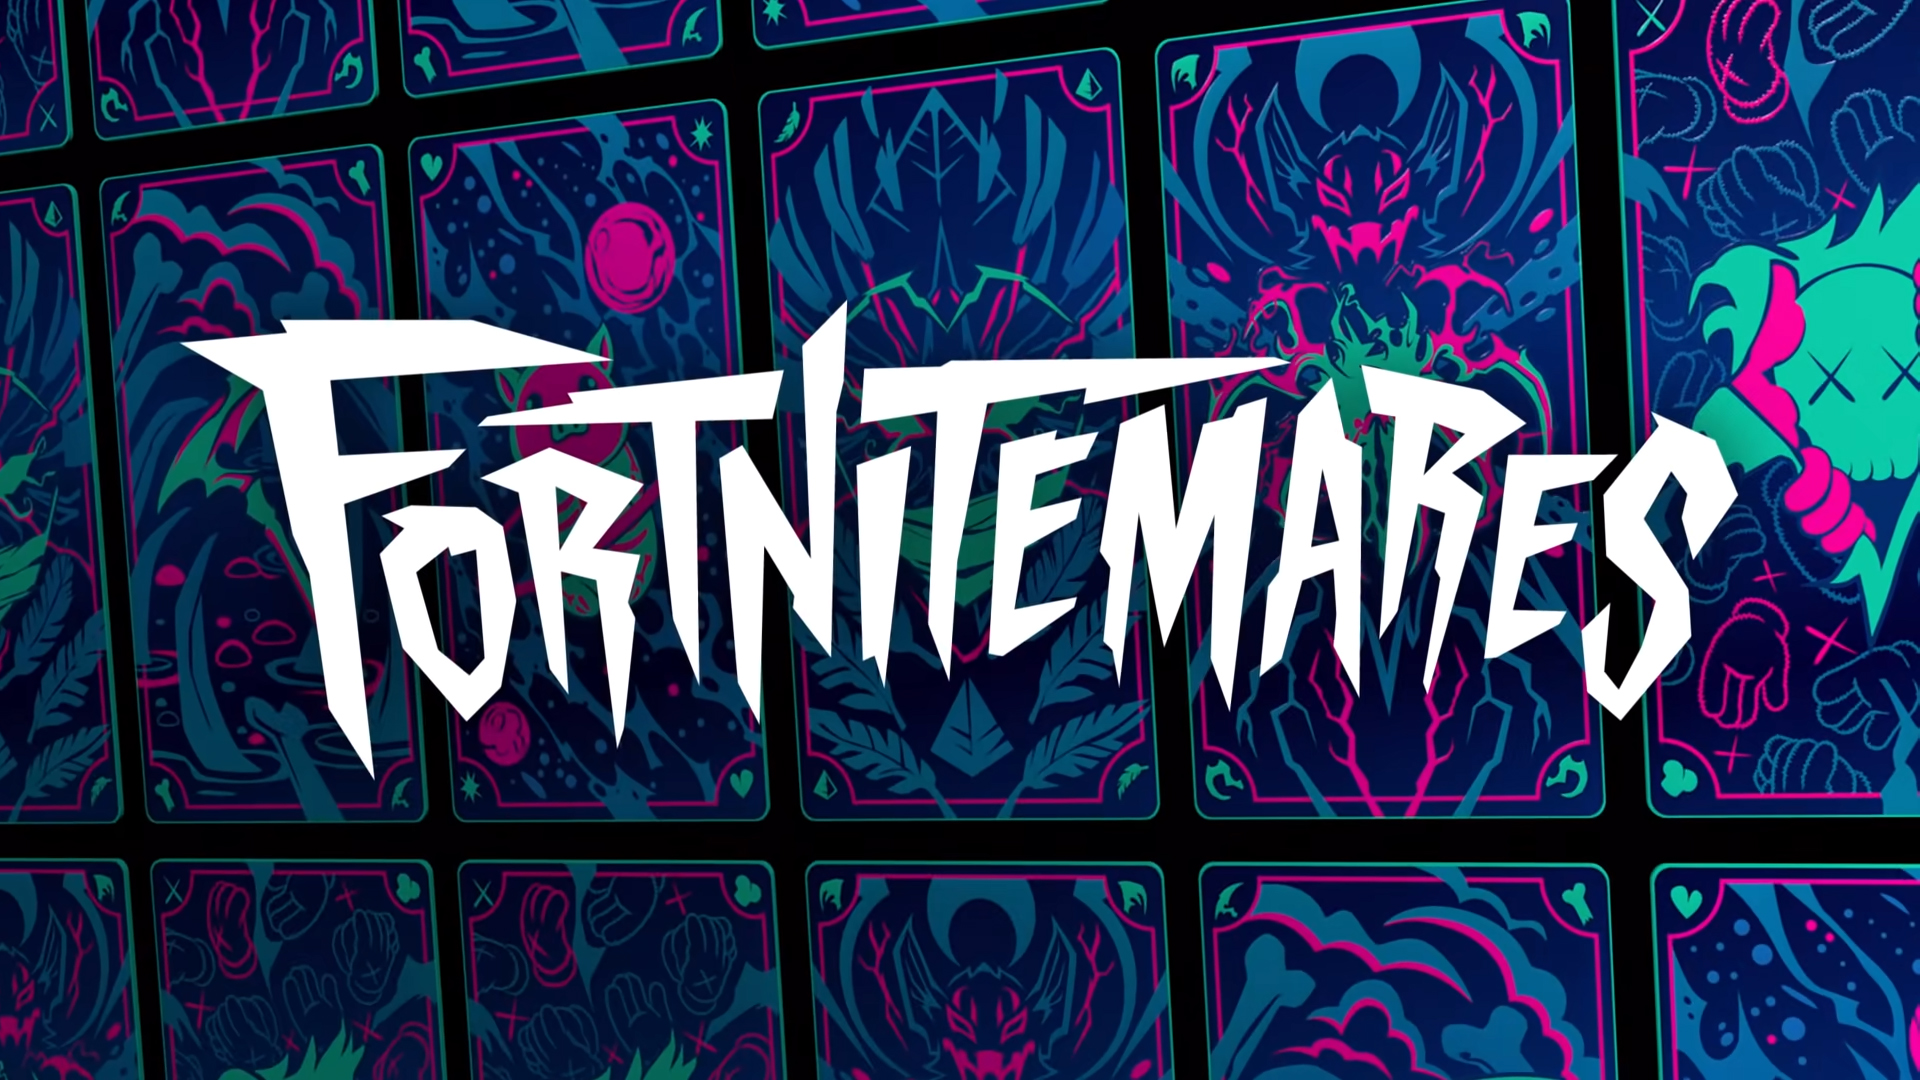 Fortnite Fortnitemares 2022 Start Date, New Outfits And More